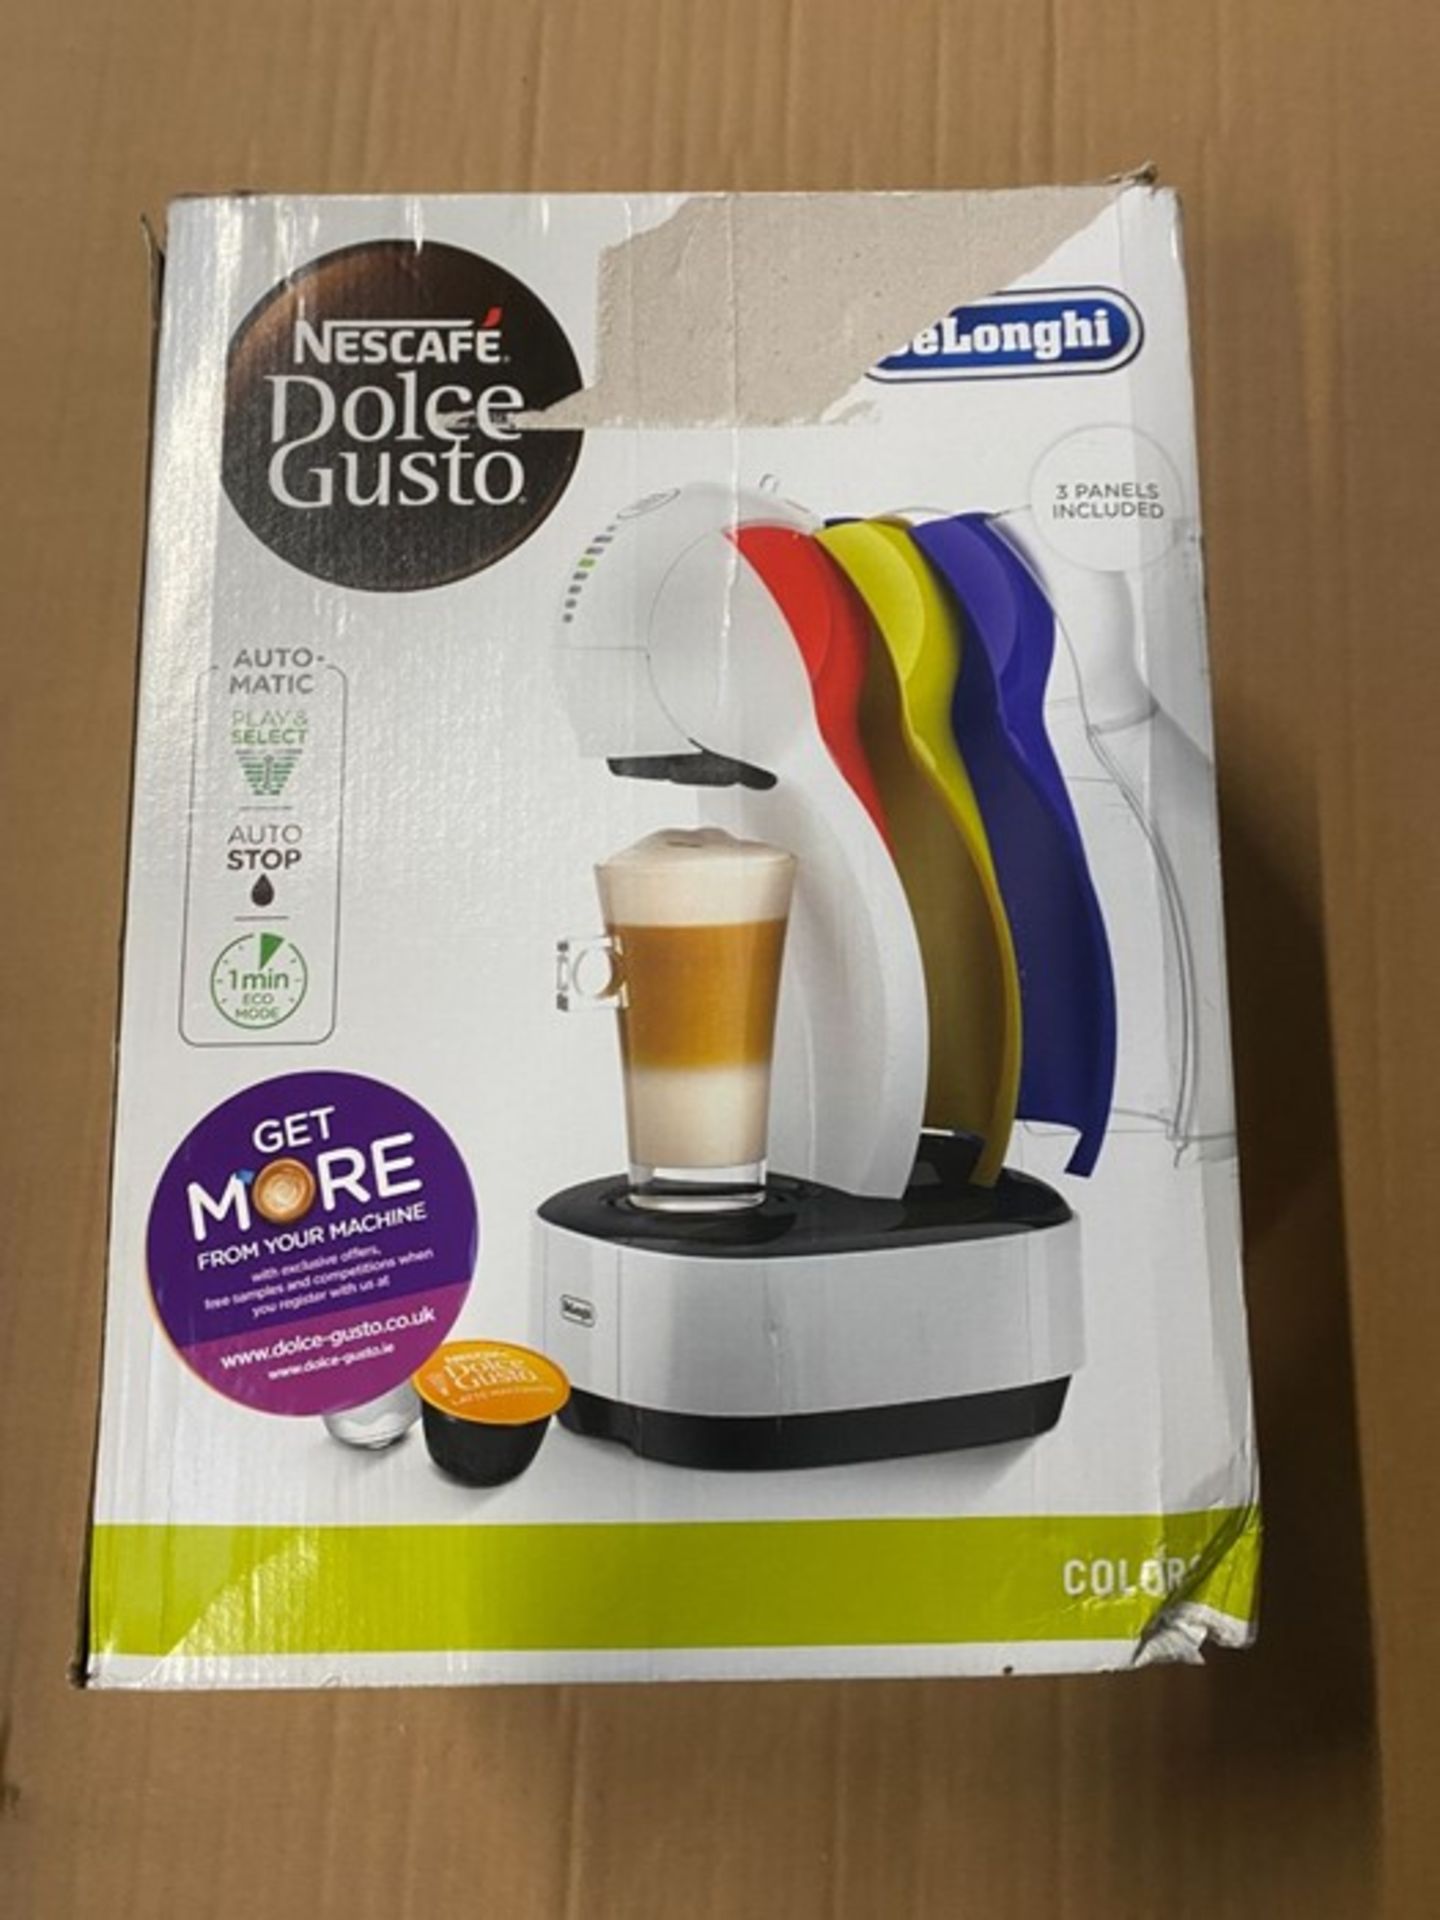 ONE LOT TO CONTAIN ONE NESCAFE DOLCE GUSTO COFFEE MACHINE RRP £79.00 (CUSTOMER RETURNS UNTESTED BY